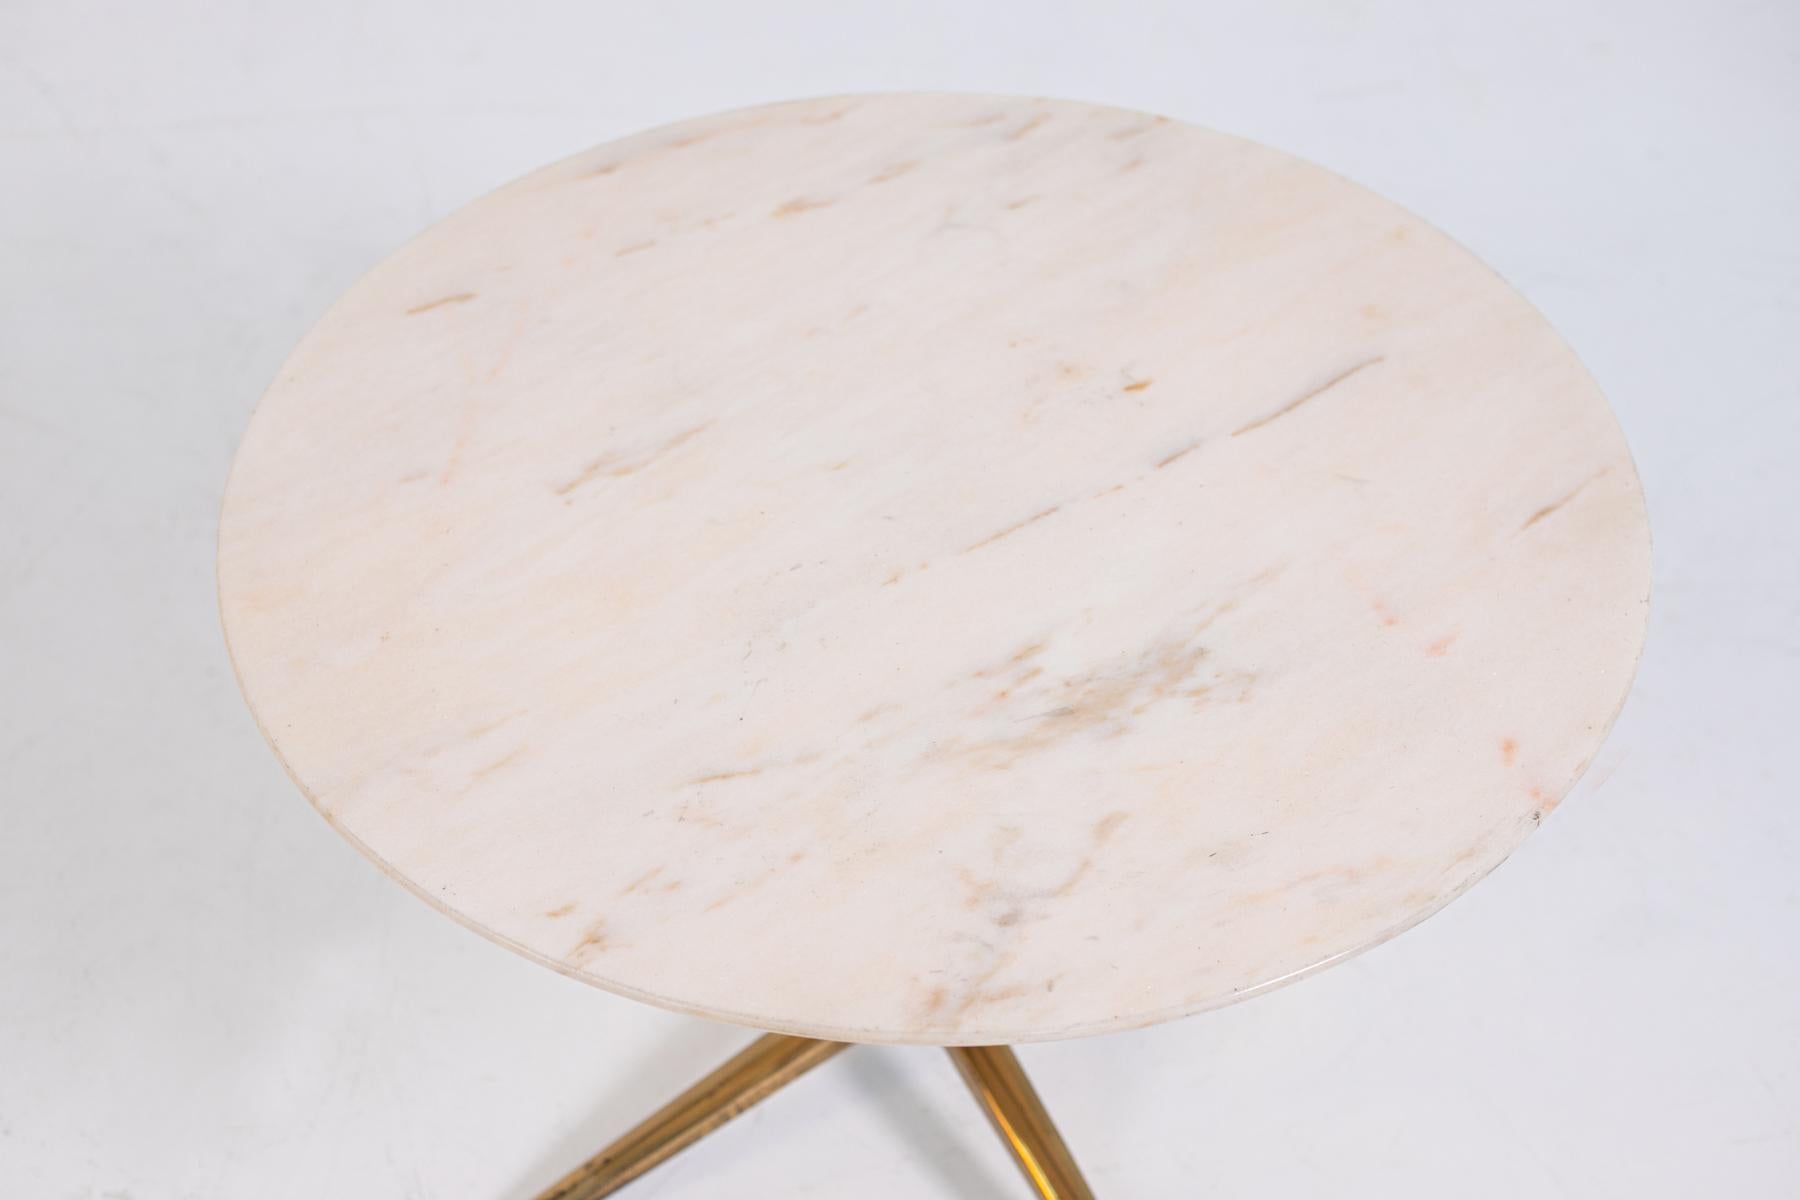 Elegant and refined Melchiorre Bega coffee table from the 1950s. The coffee table has a marble top with pink veins, The Melchiorre Bega coffee table has a single pedestal with four brass legs.The central trunk is made of wood. The Melchiorre Bega